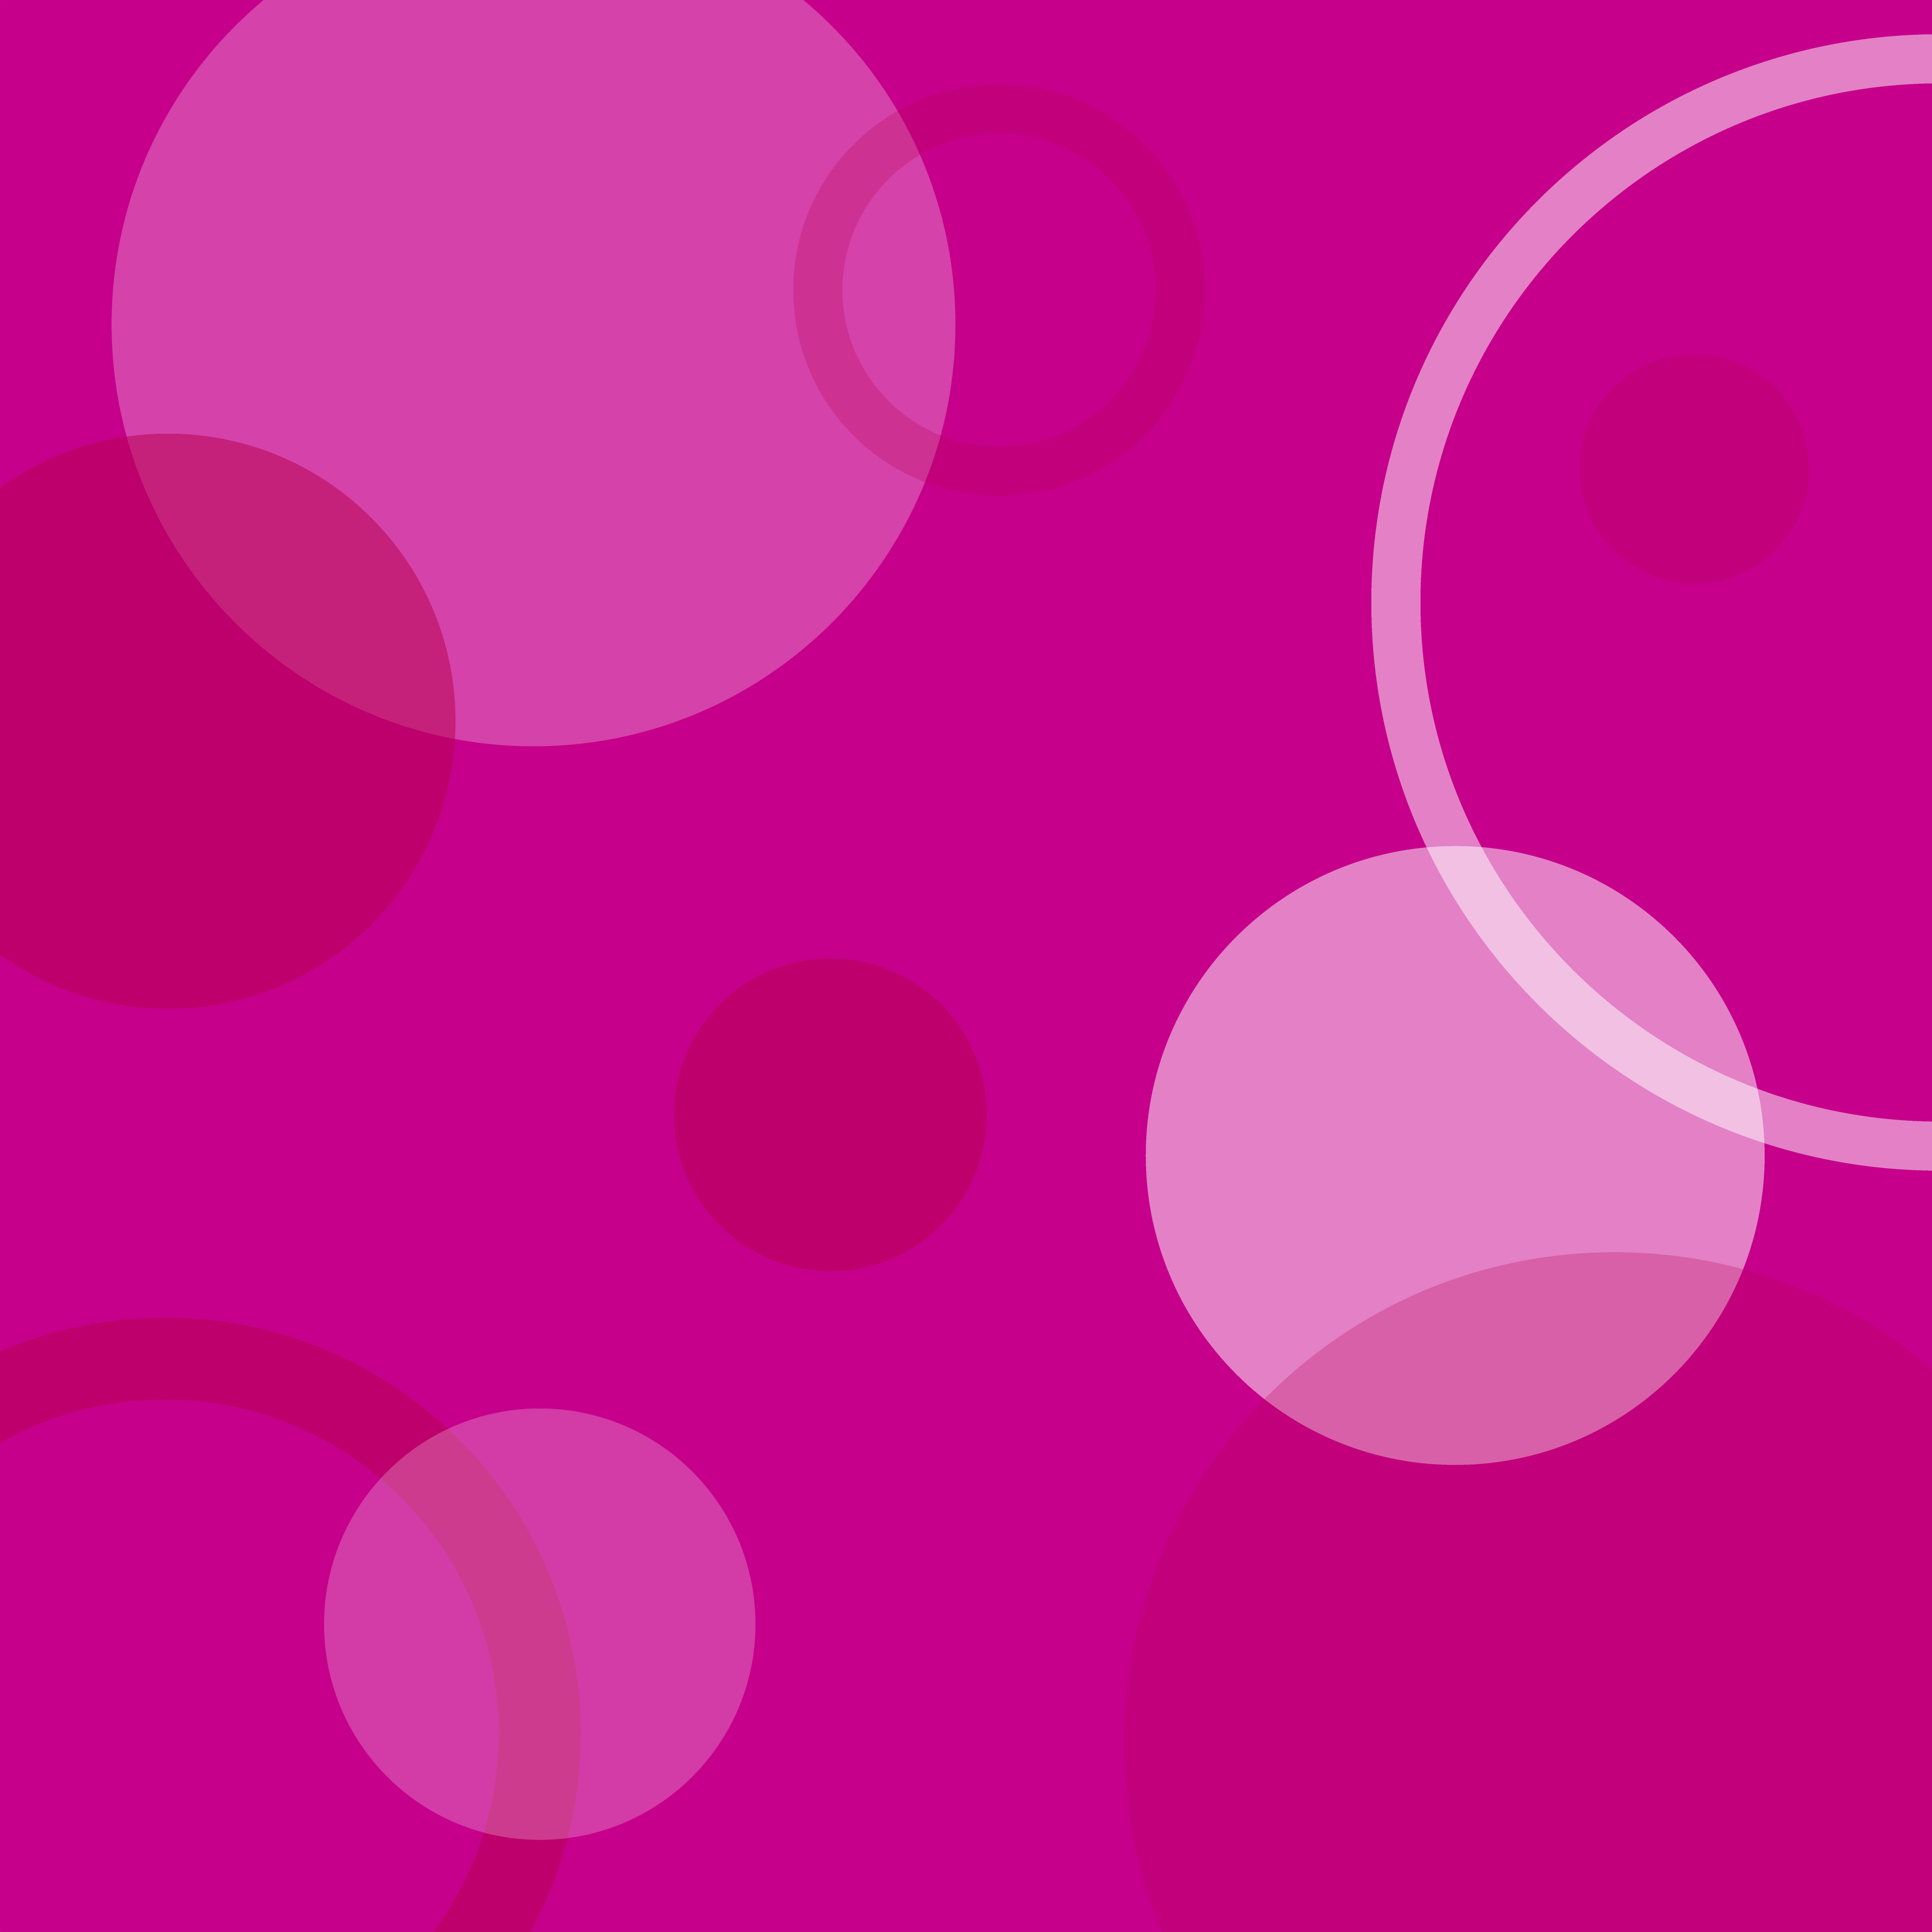 Circle Pattern On Pink Background Clip Art